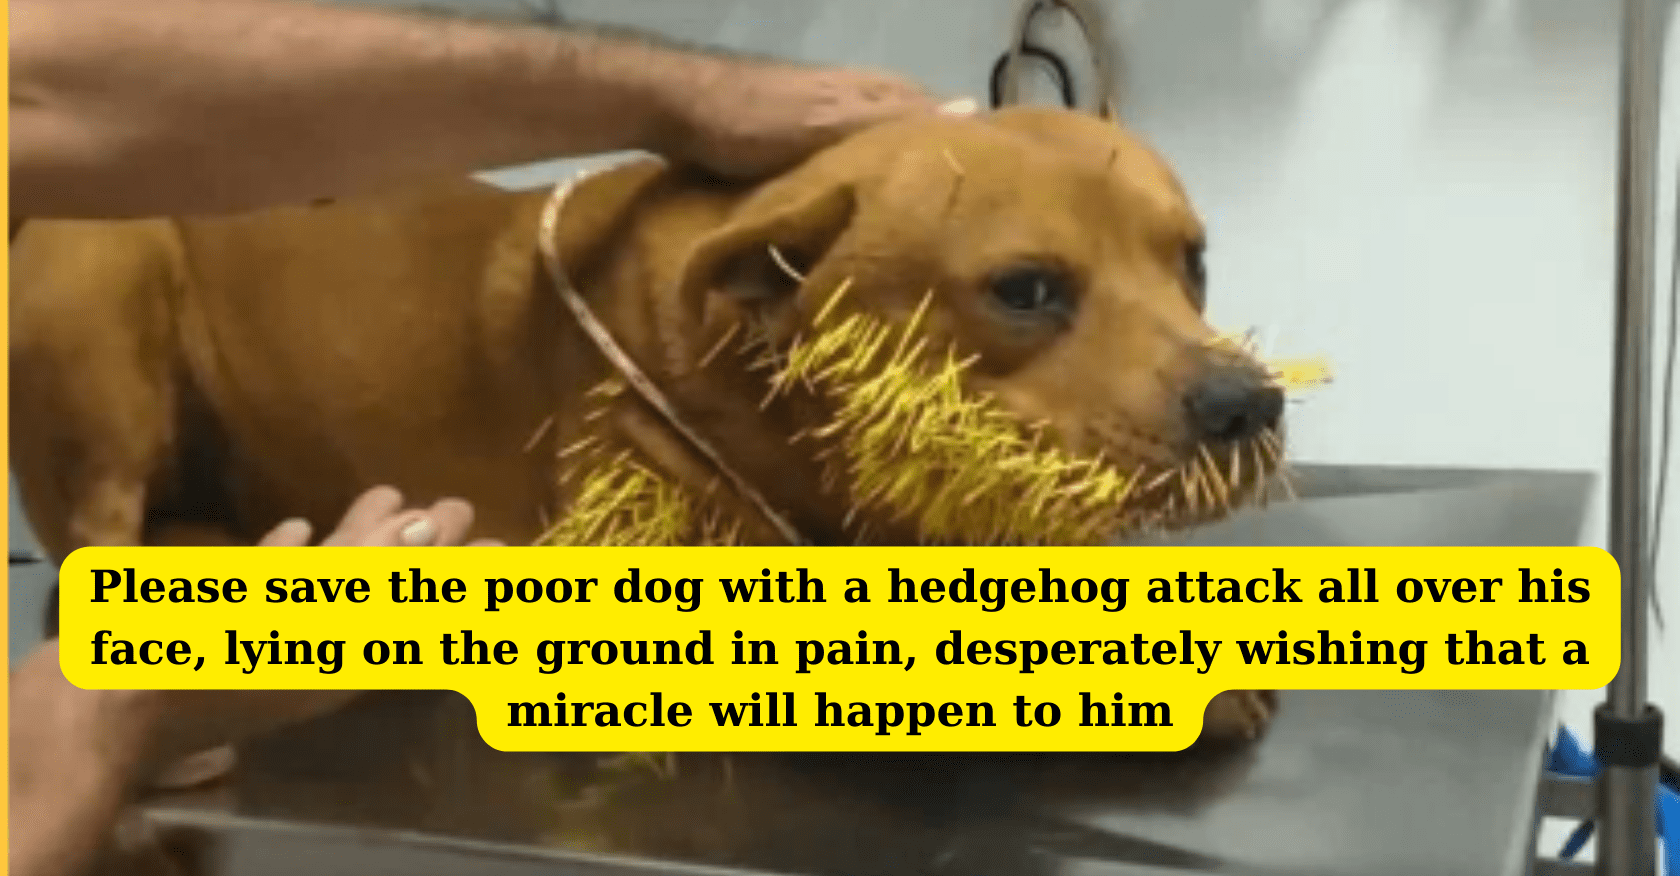 Please save the poor dog with a hedgehog attack all over his face, lying on the ground in pain, desperately wishing that a miracle will happen to him